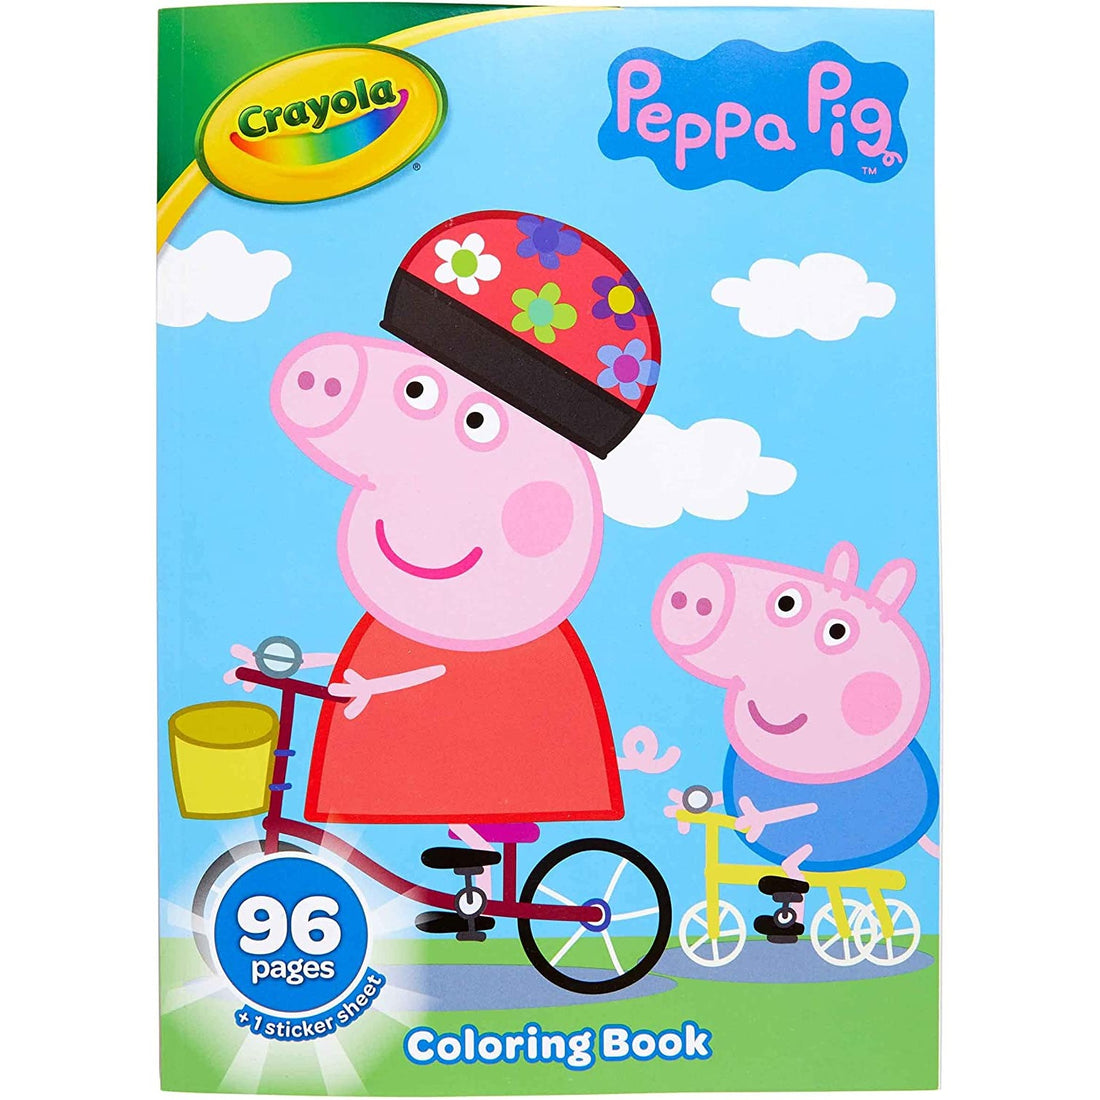 Crayola Peppa Pig Coloring Book with Stickers (96 Pages) Only $1.99!